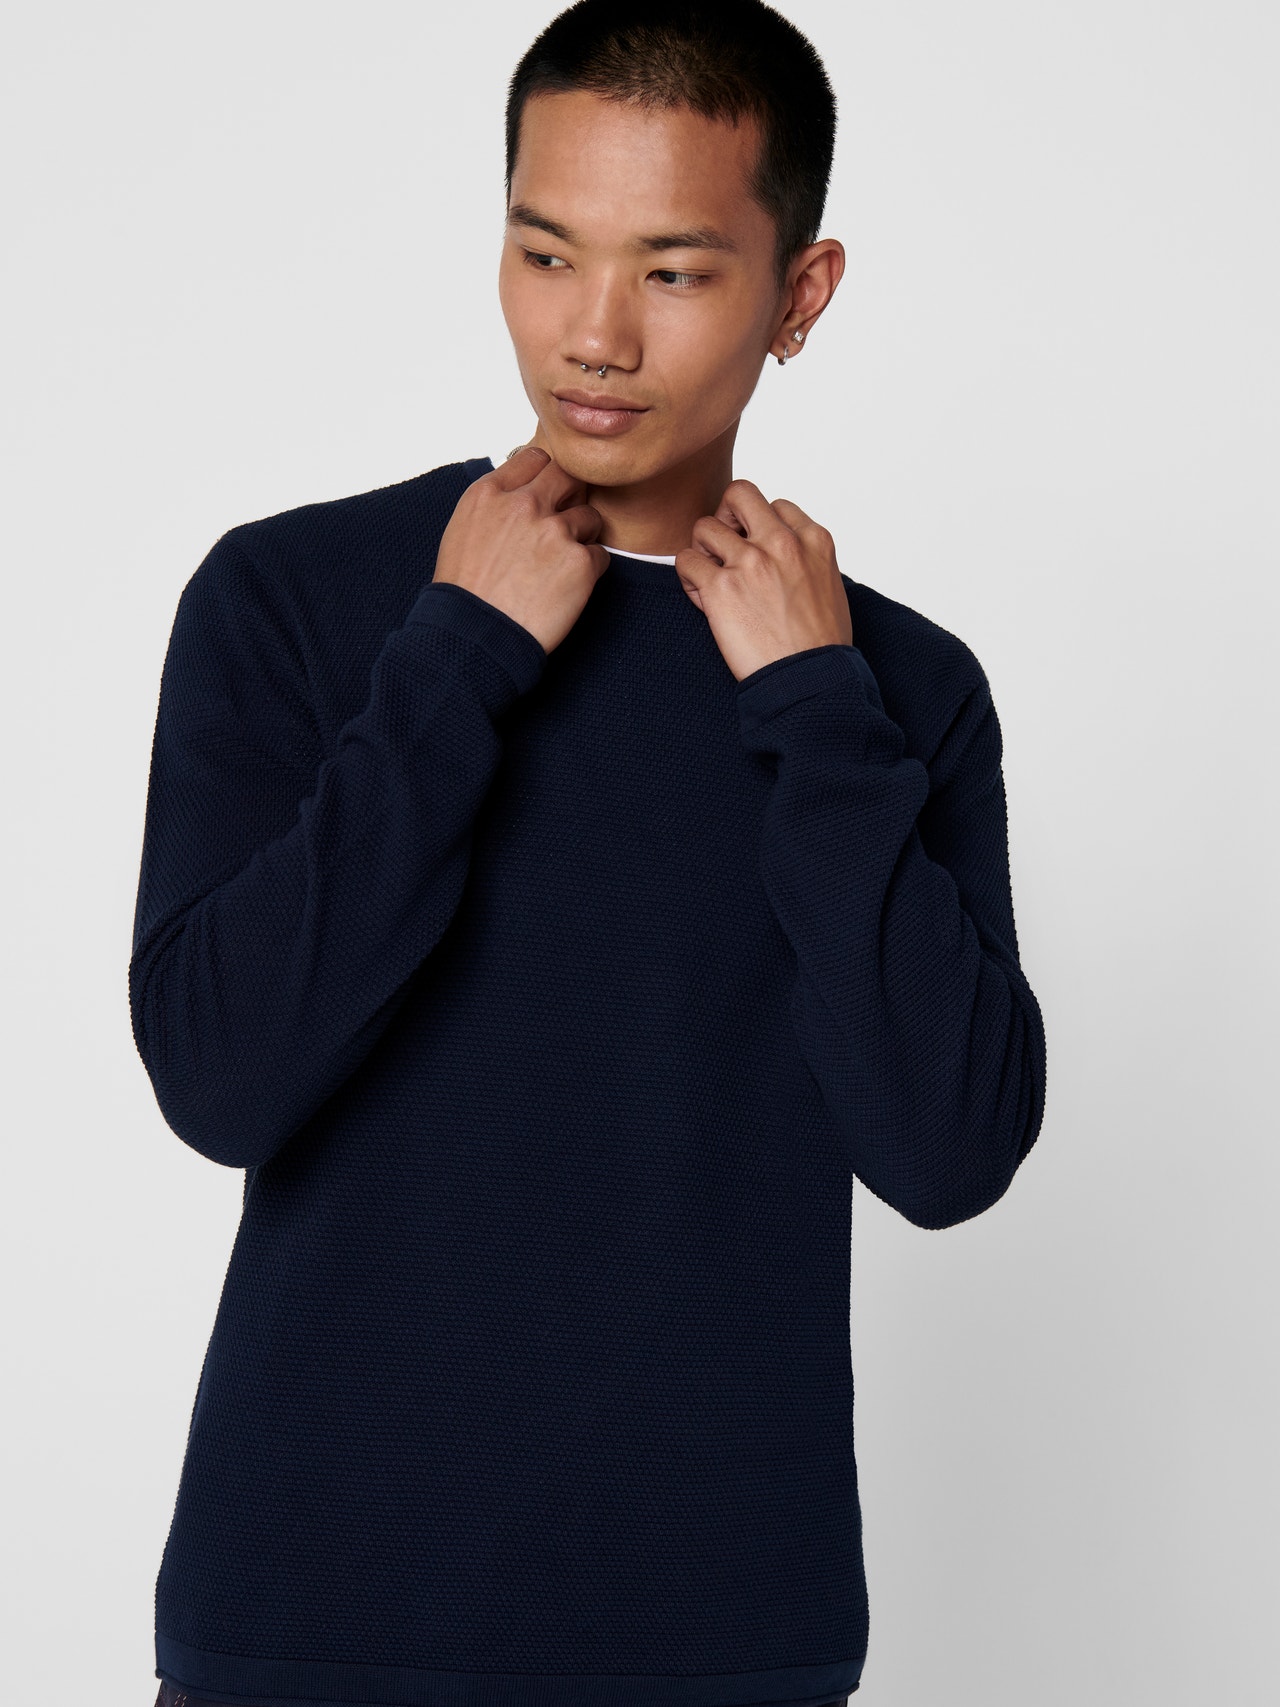 ONLY & SONS Normal passform Rundringning Pullover -Dress Blues - 22016980